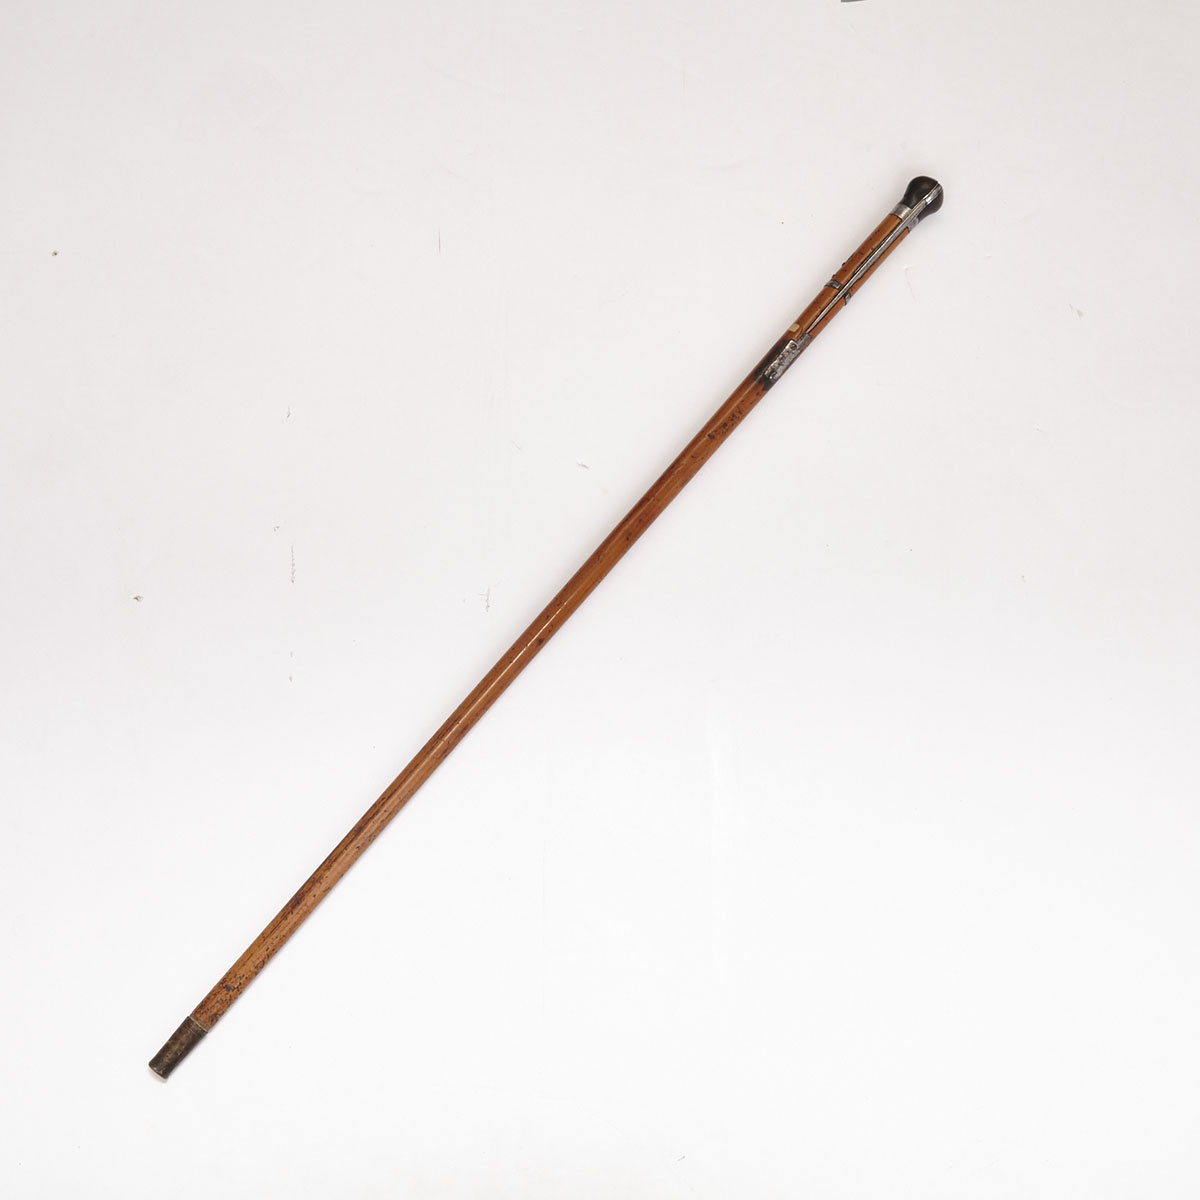 Victorian Malacca and Horn Swithblade Gadget Cane, 19th century